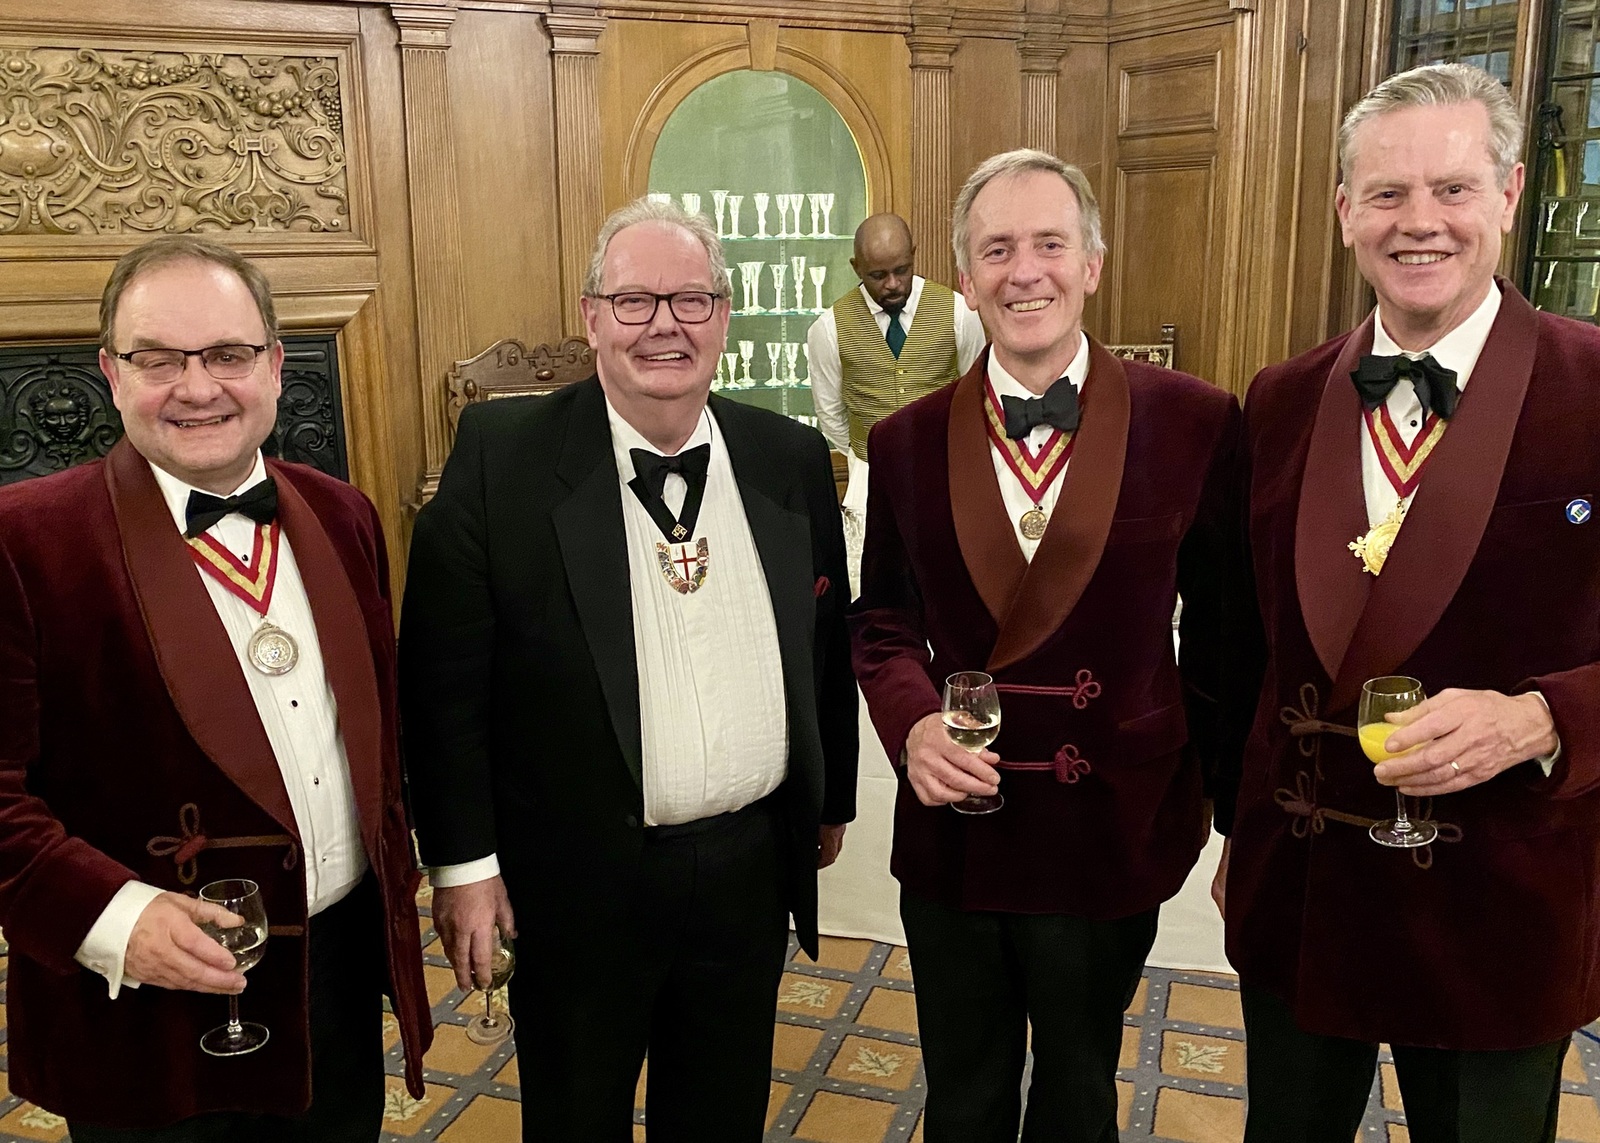 Chartered Accountants in their splendid Livery Uniform!